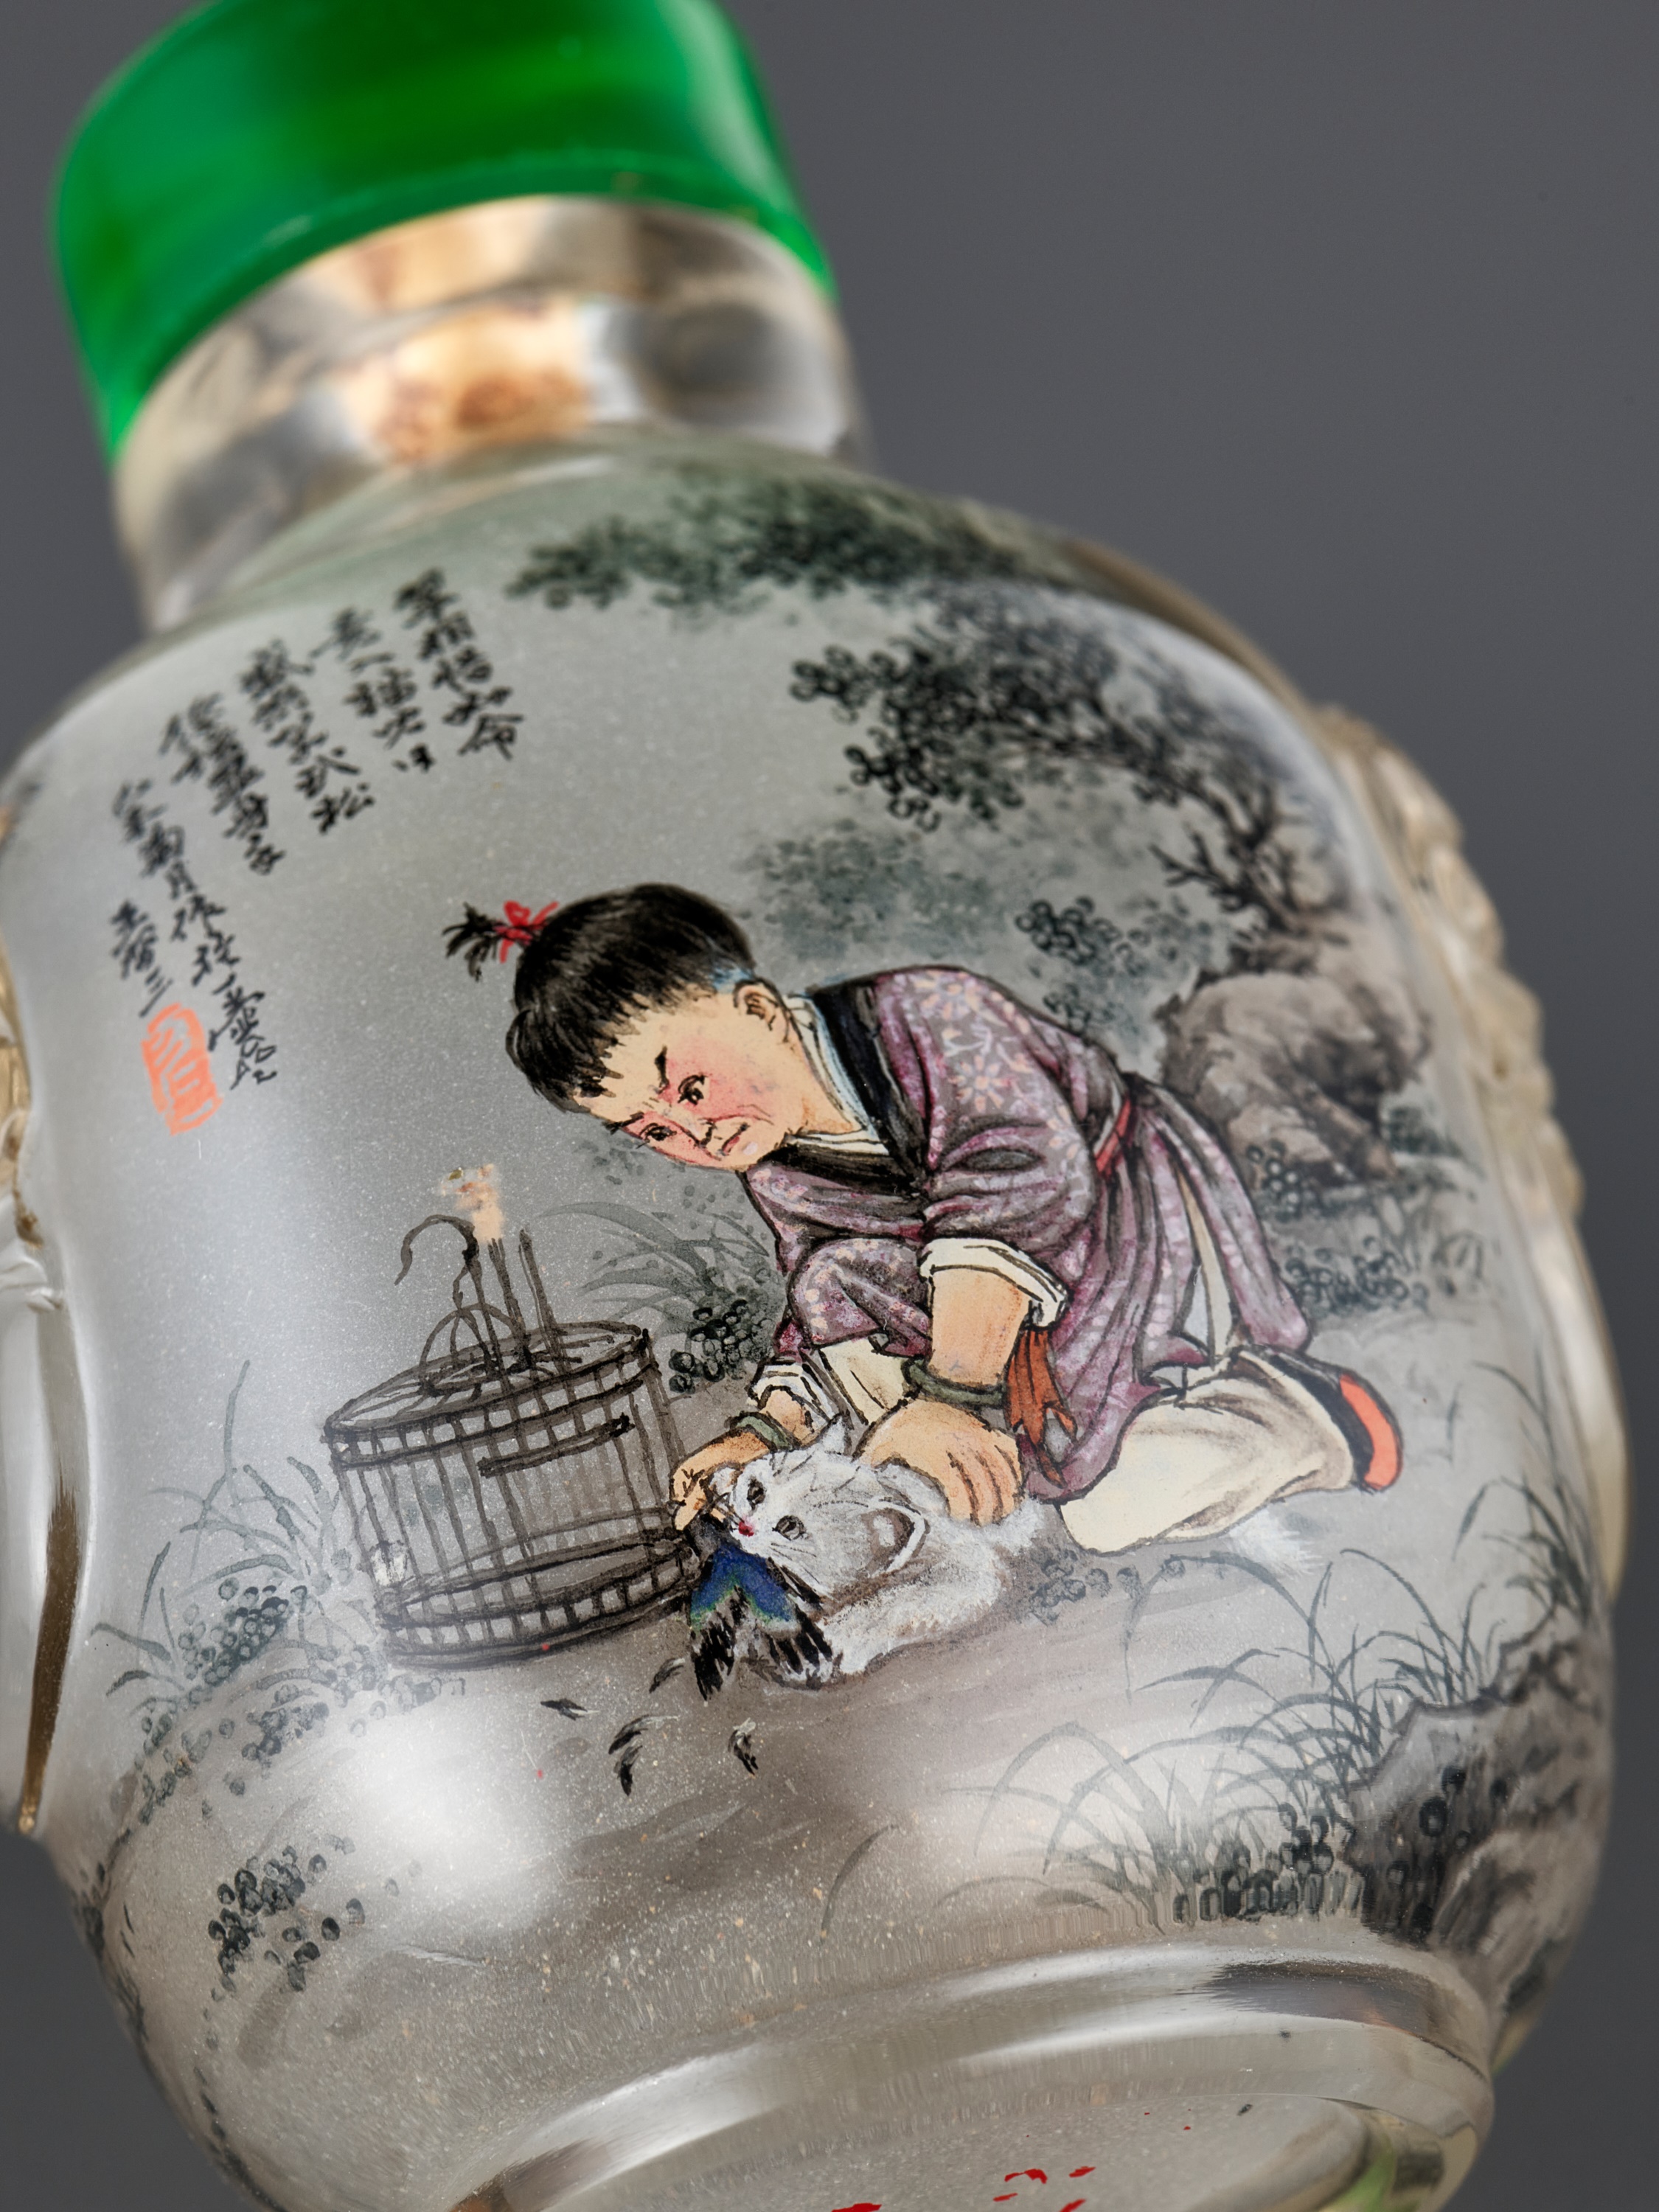 Lot 72 - AN INSIDE-PAINTED GLASS SNUFF BOTTLE, BY WANG